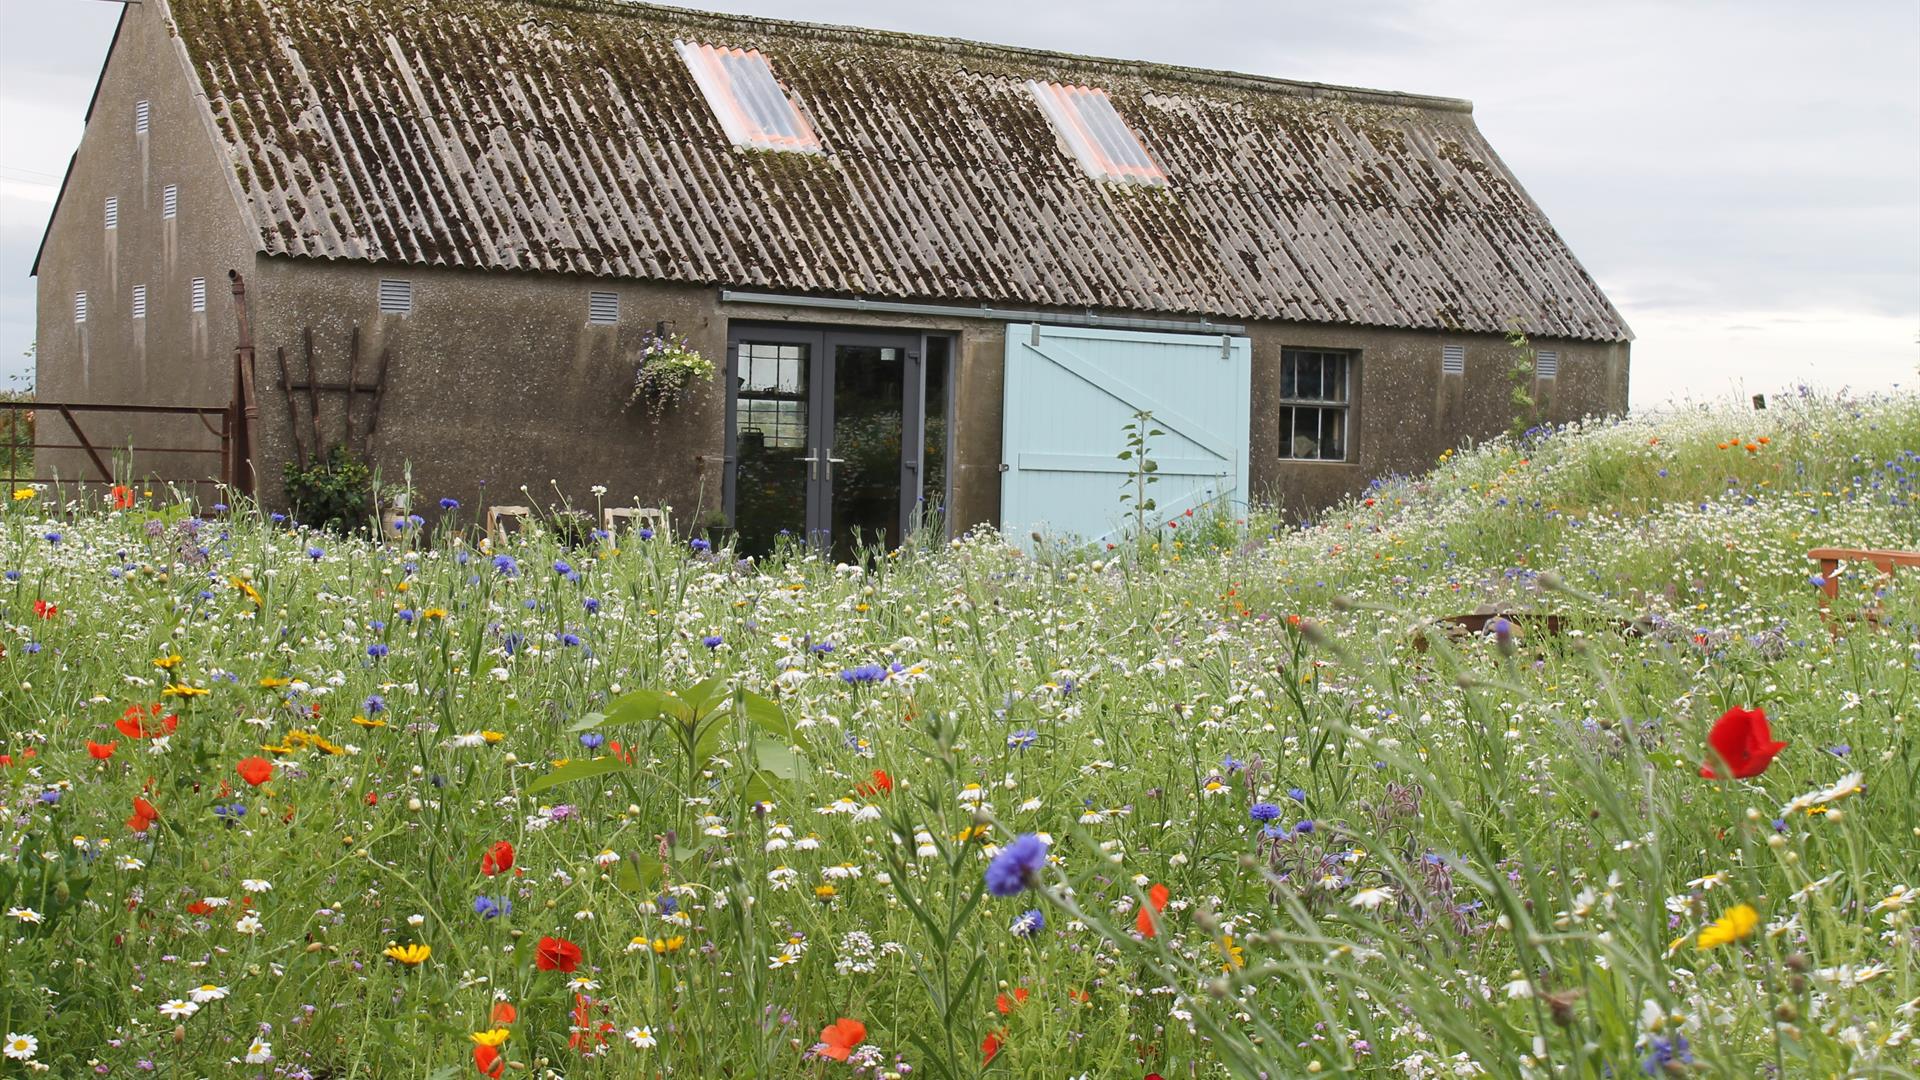 Image of Benefield Spencer Glass studio, a simple oblong shape building with grey brown walls and roof. There is a double glass door and one small window in the front walls of the building. The roof has two skylights. In front of the building is a beauiful colourful wildflower meadow of flowers and grass.